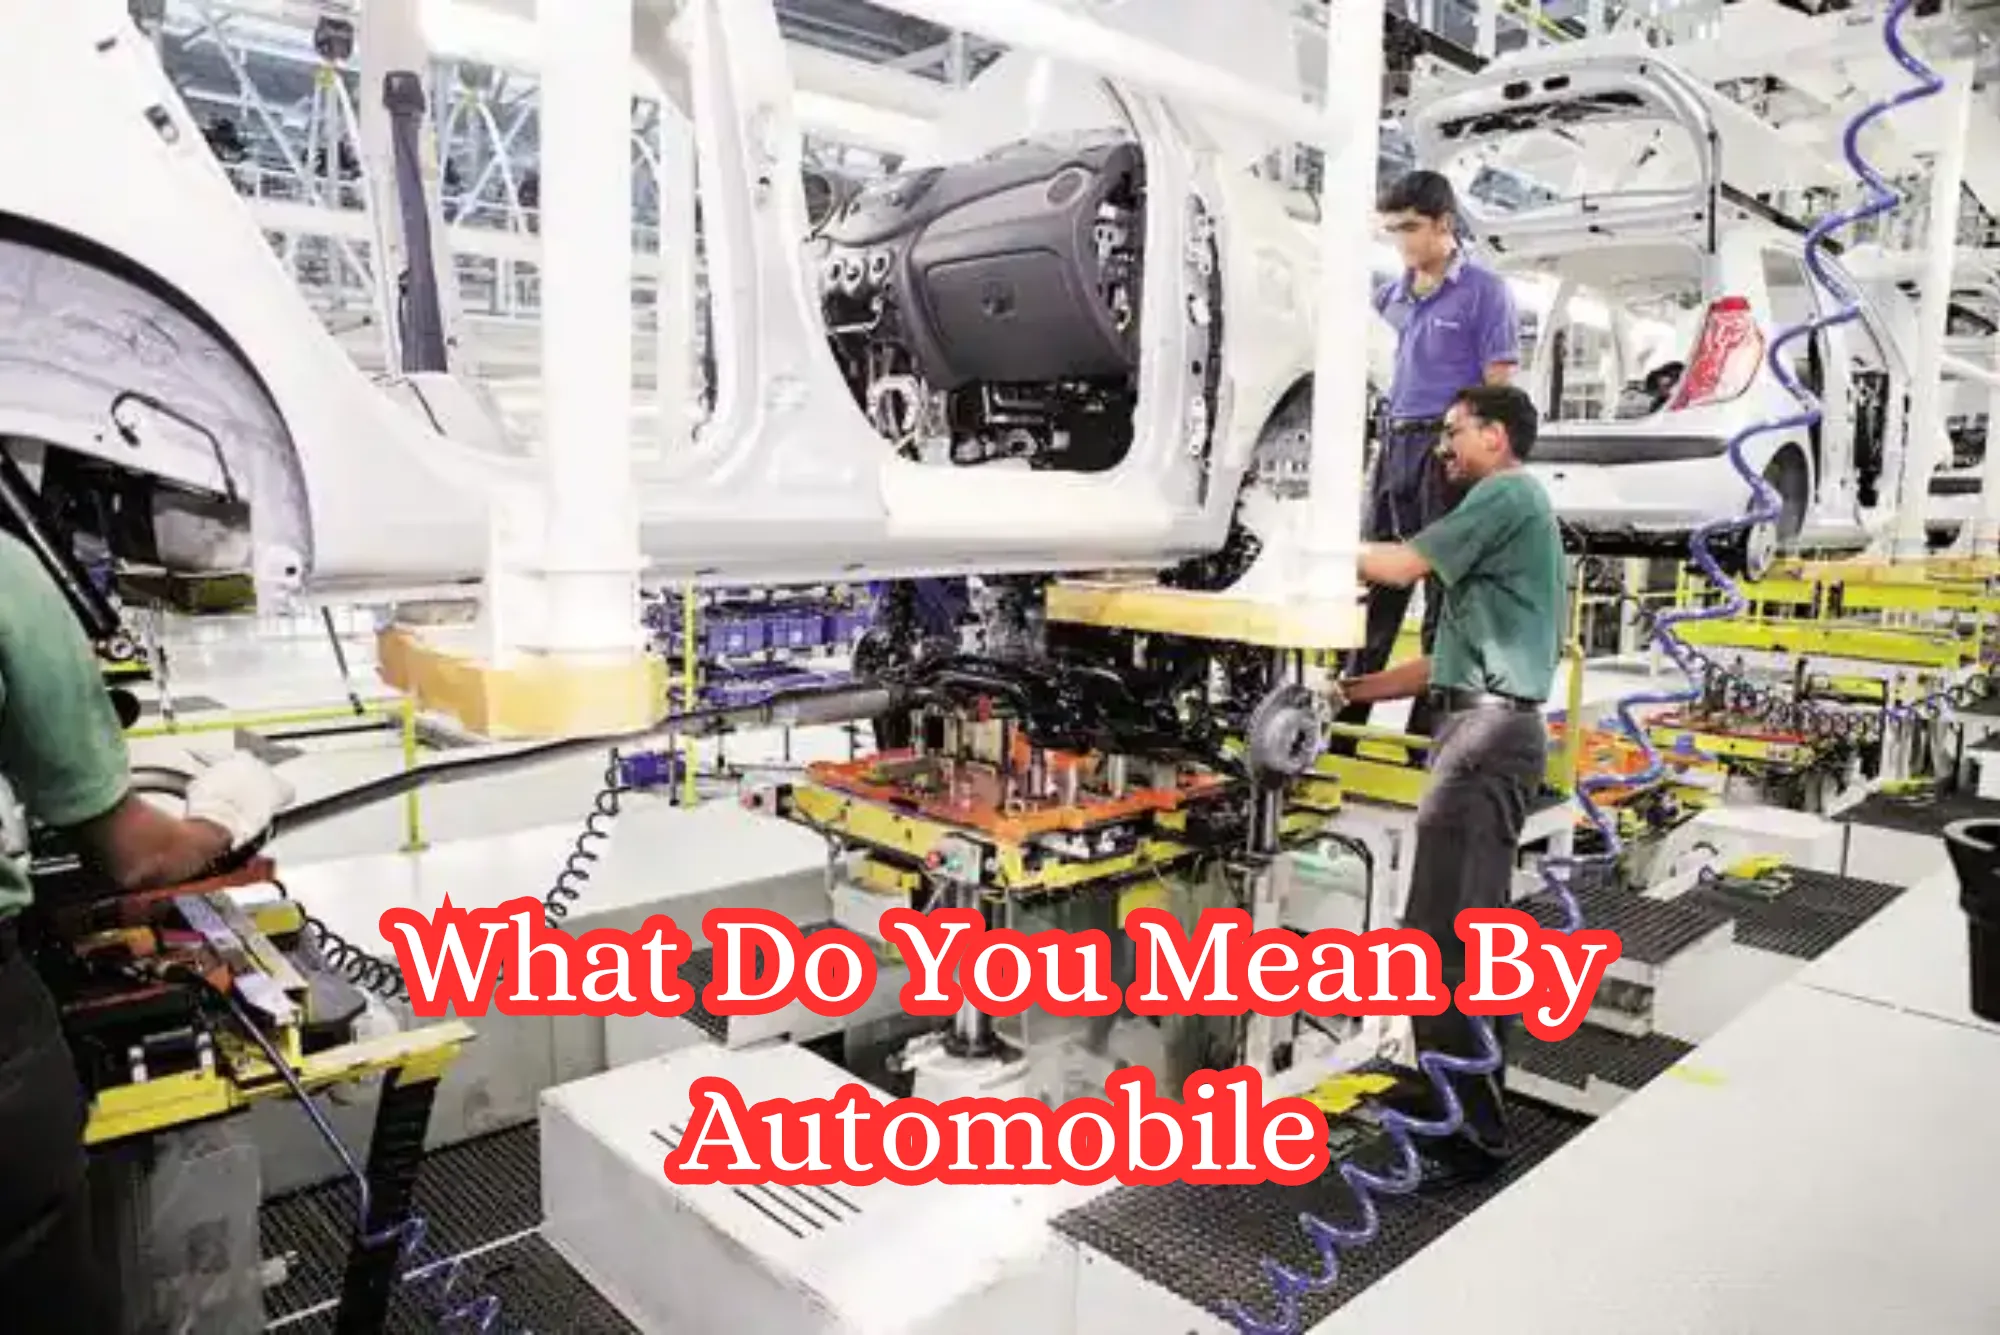 What Do You Mean By Automobile